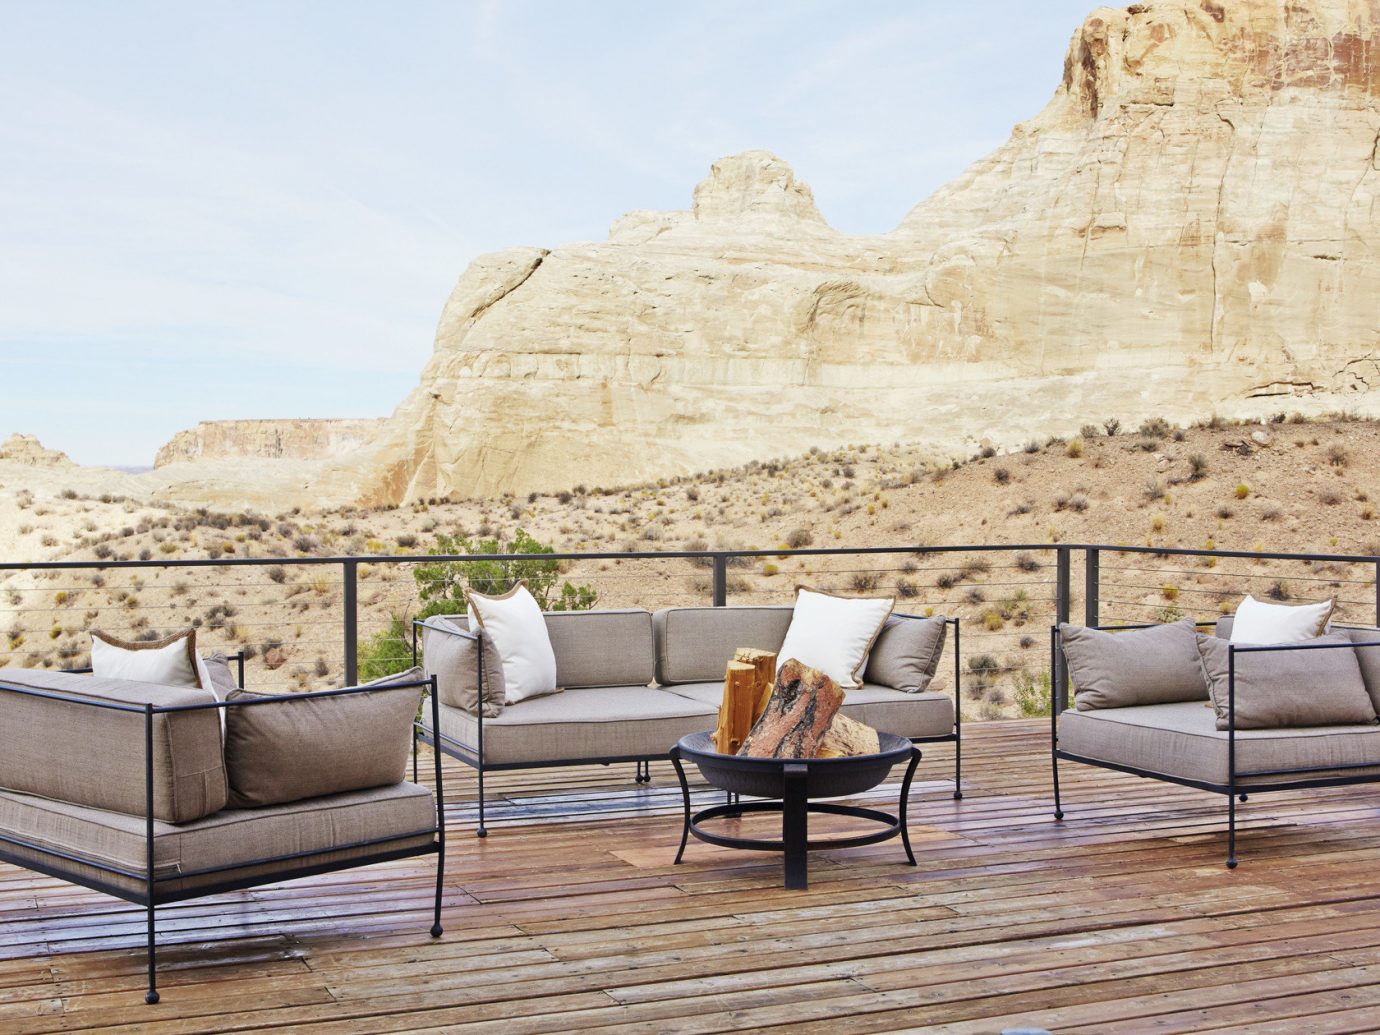 Lounge area on patio with view of desert scape